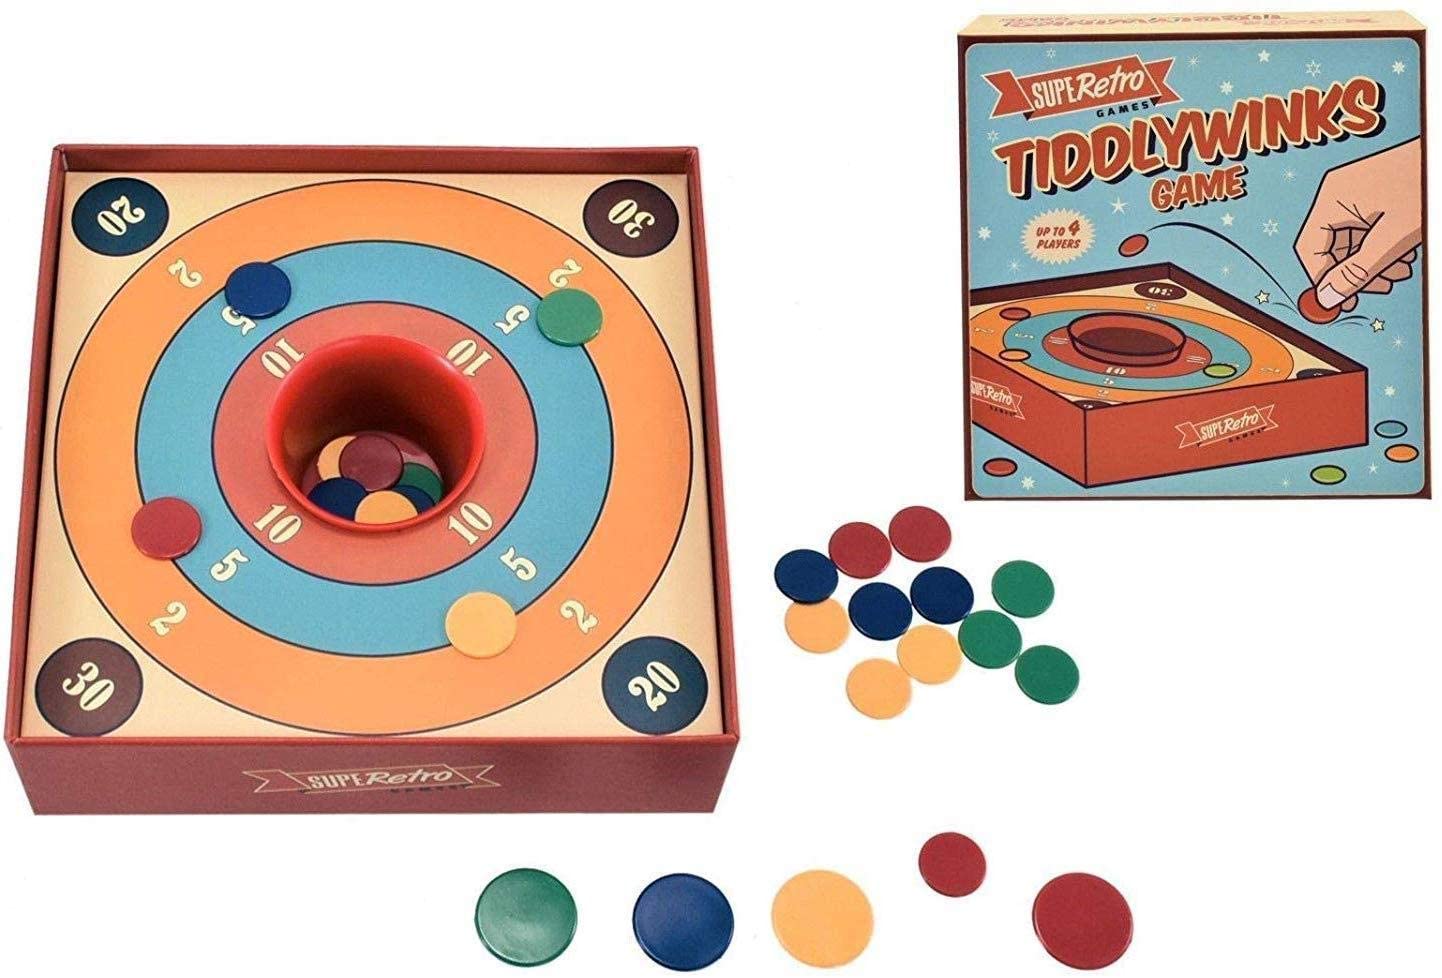 Tiddlywinks Classic Game